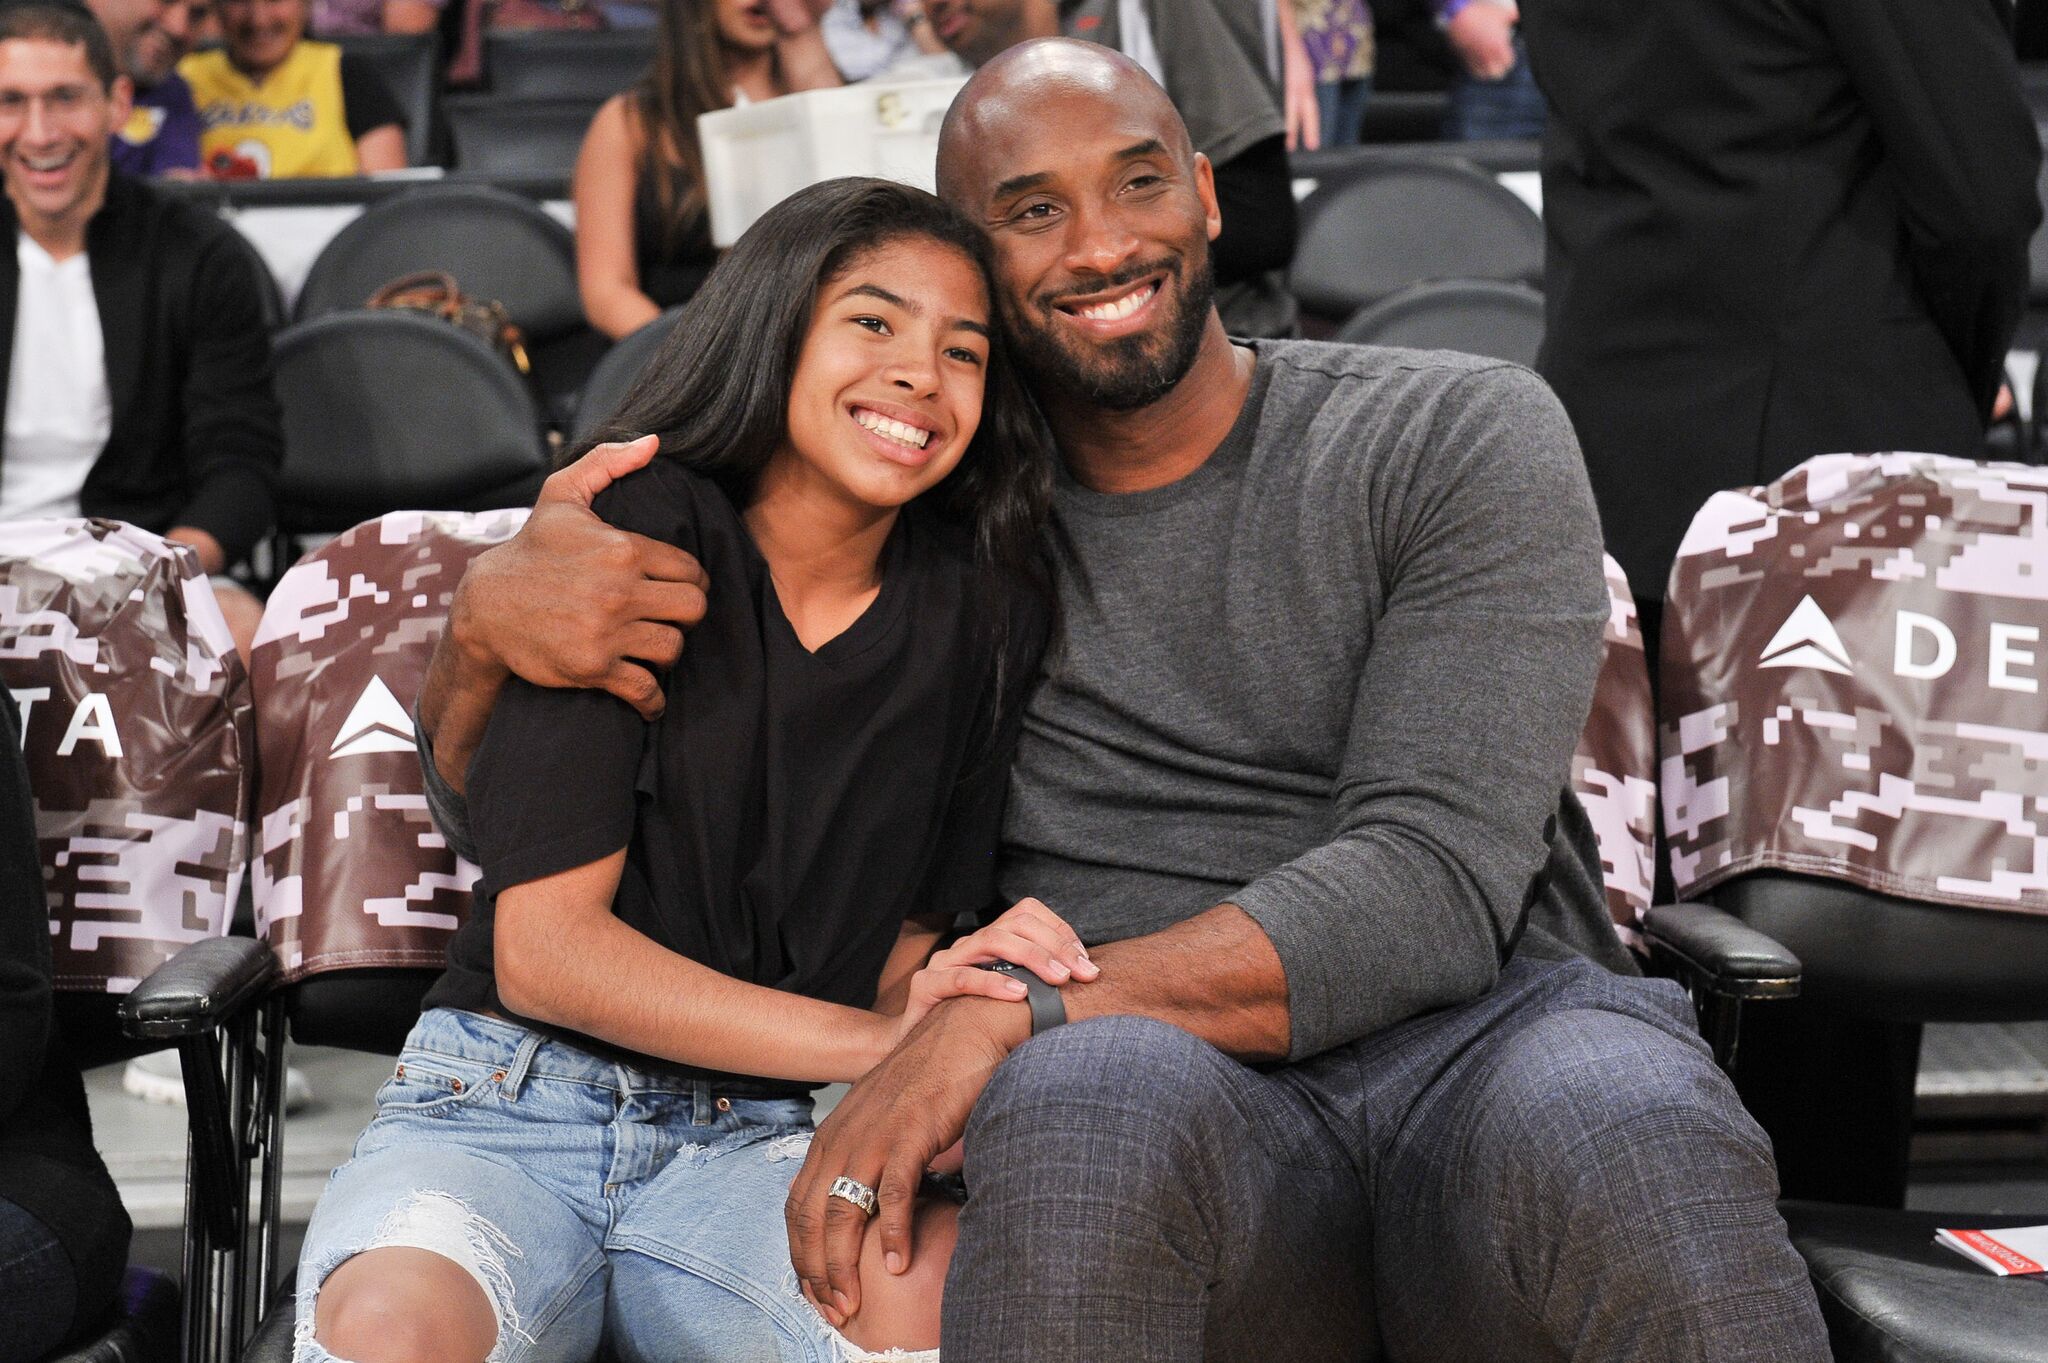 Kobe Bryant and his daughter Gianna Bryant attend a basketball game between the Los Angeles Lakers and the Atlanta Hawks at Staples Center on November 17, 2019 in Los Angeles, California. | Photo: Getty Images